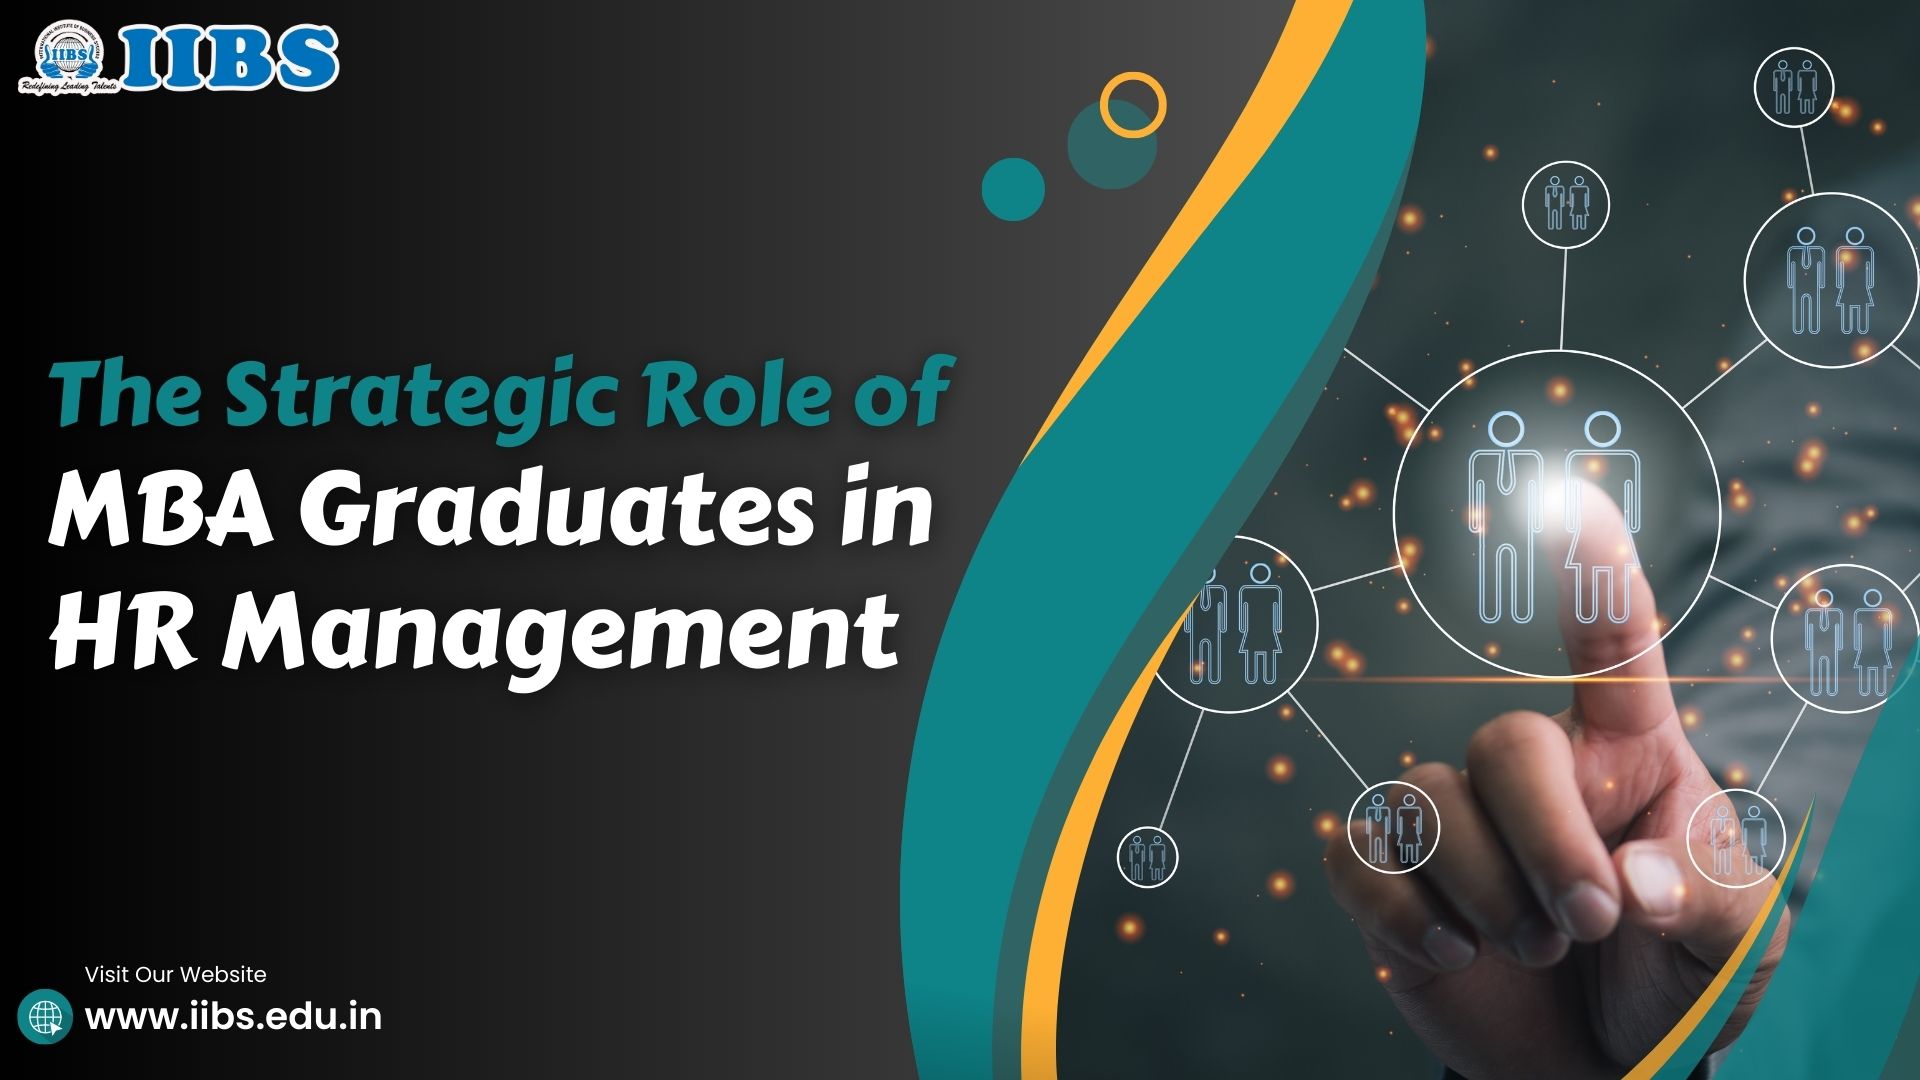 The Strategic Role of MBA Graduates in HR Management